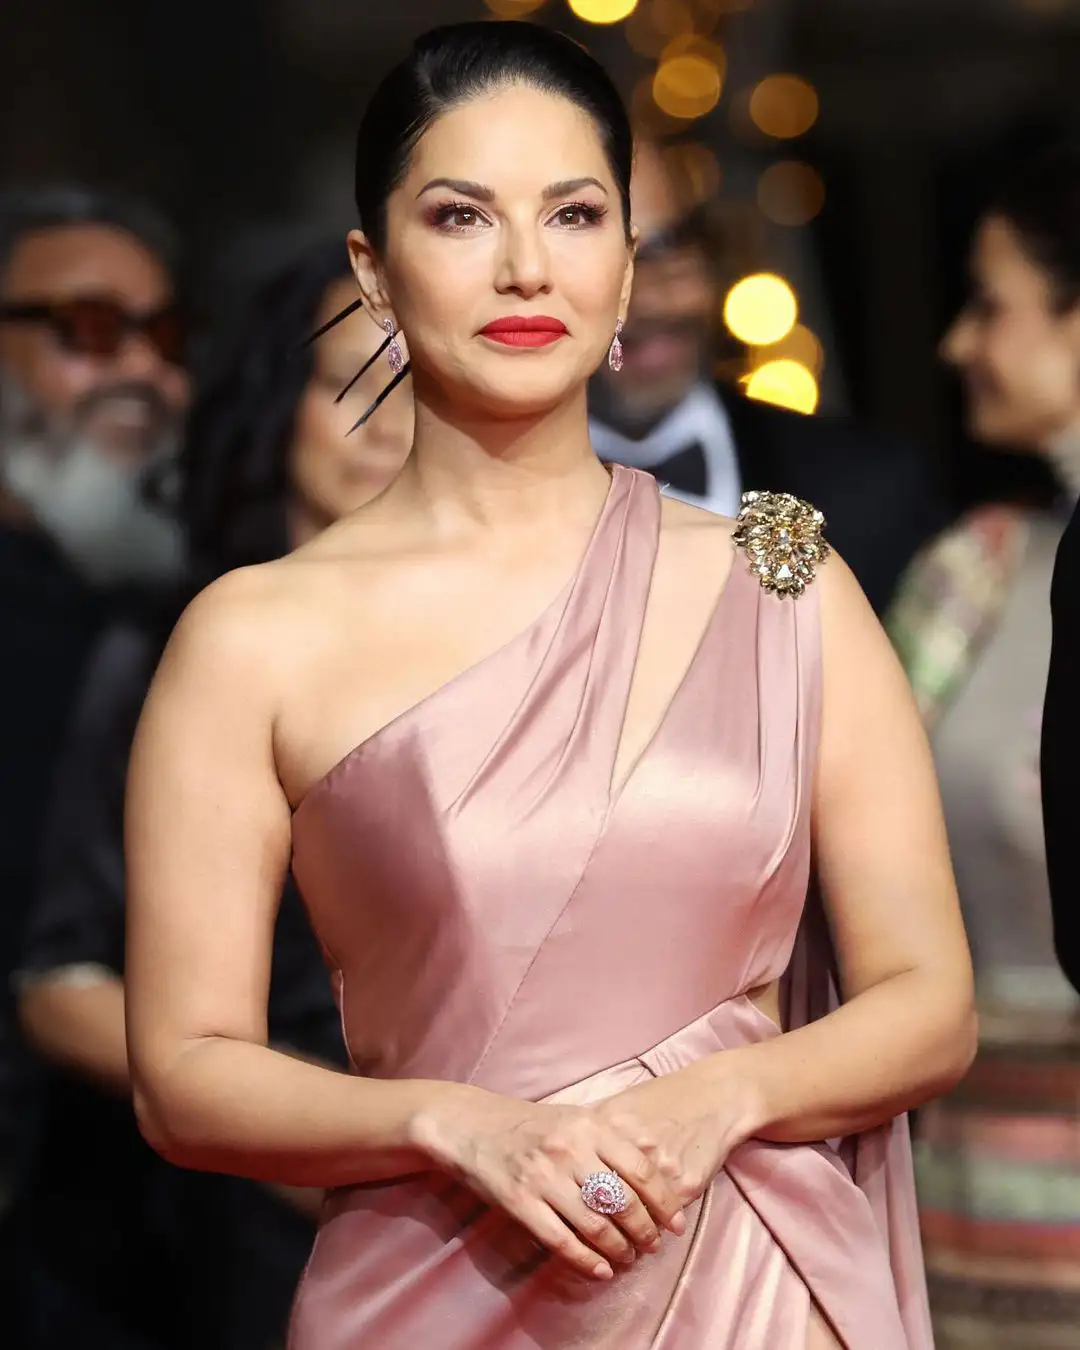 Sunny Leone walked the Cannes red carpet